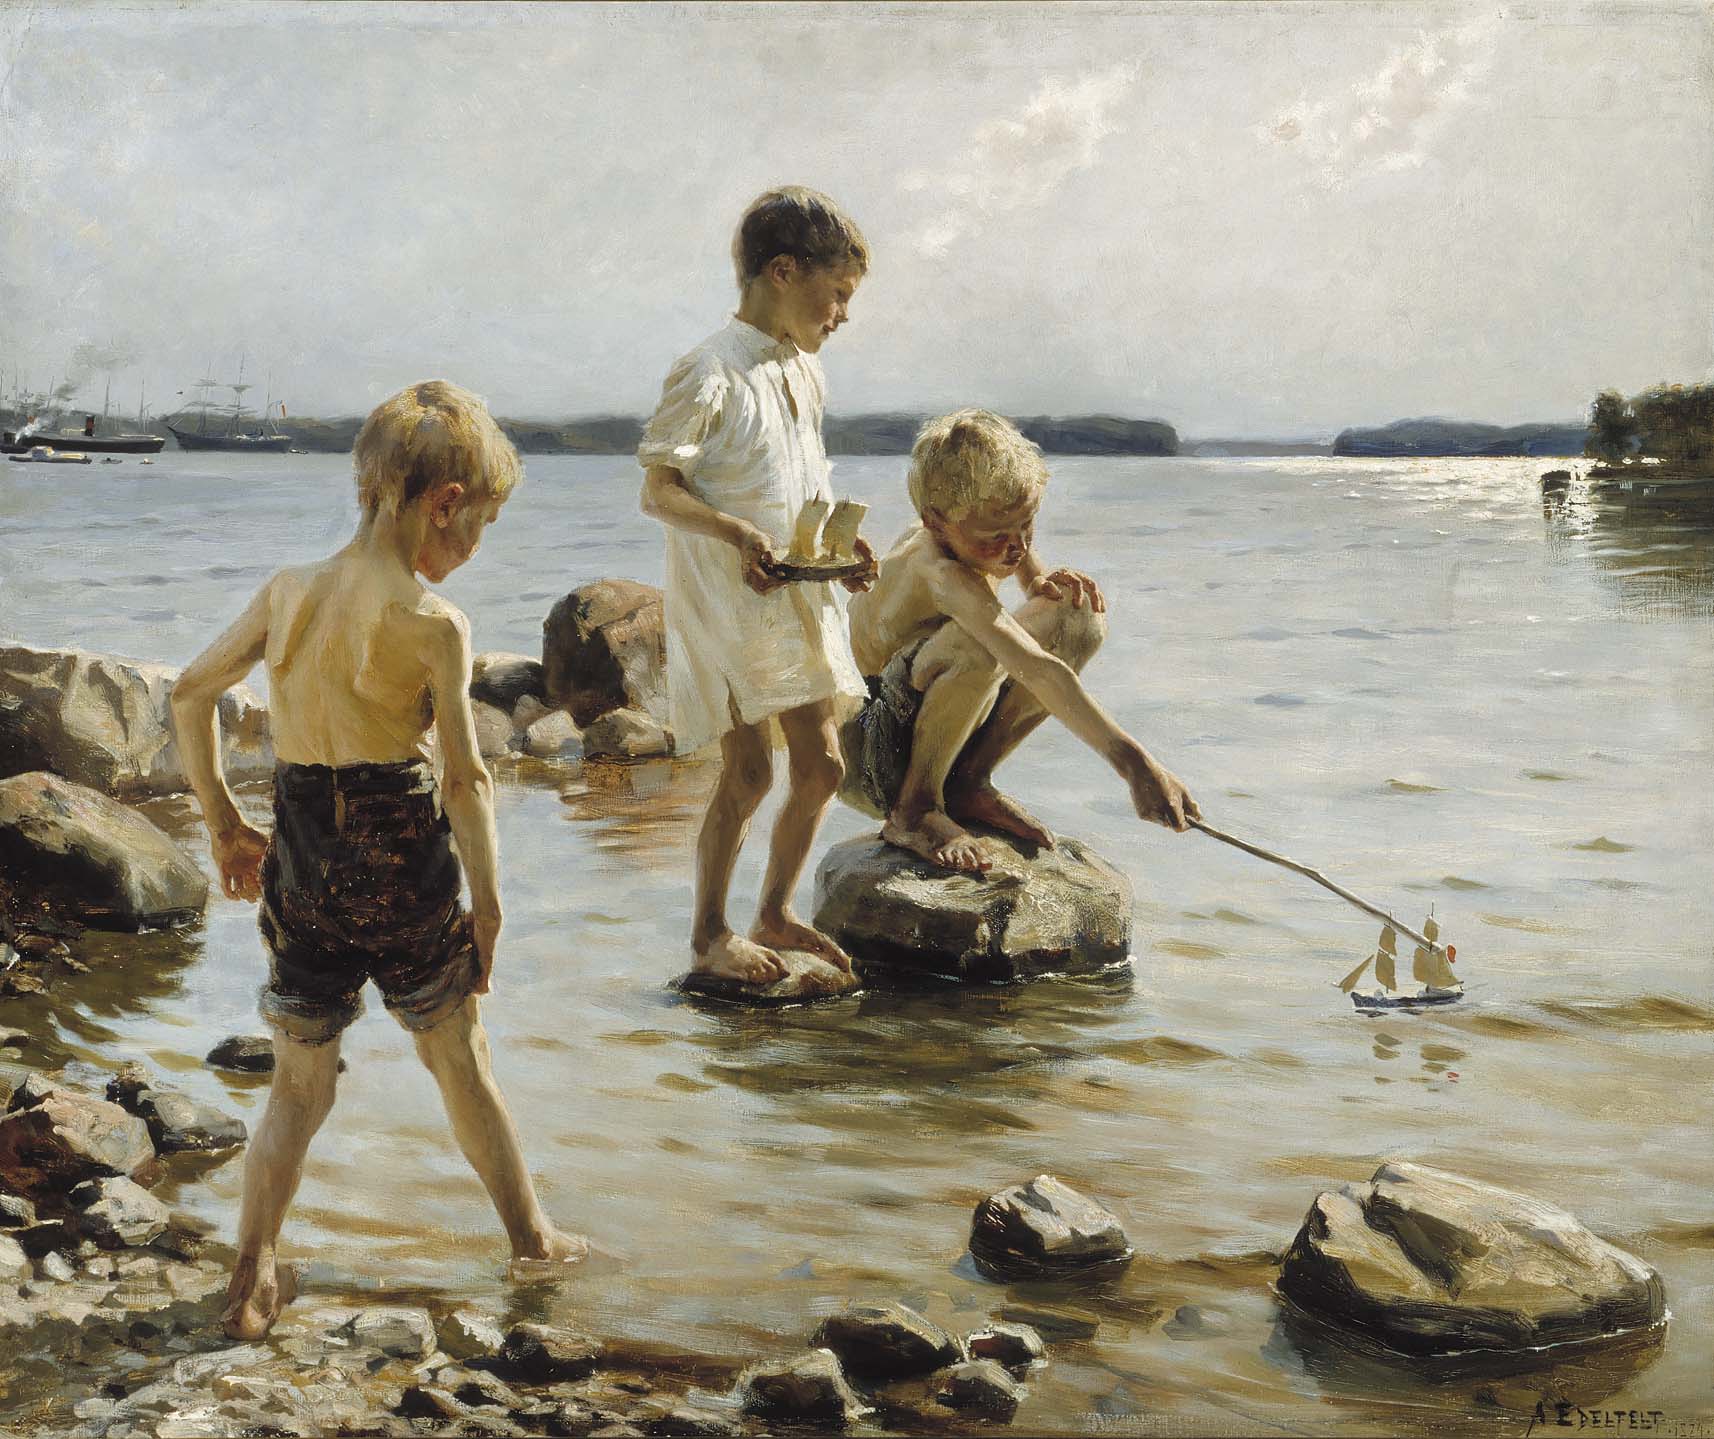 Three boys playing with toy boats by the seashore